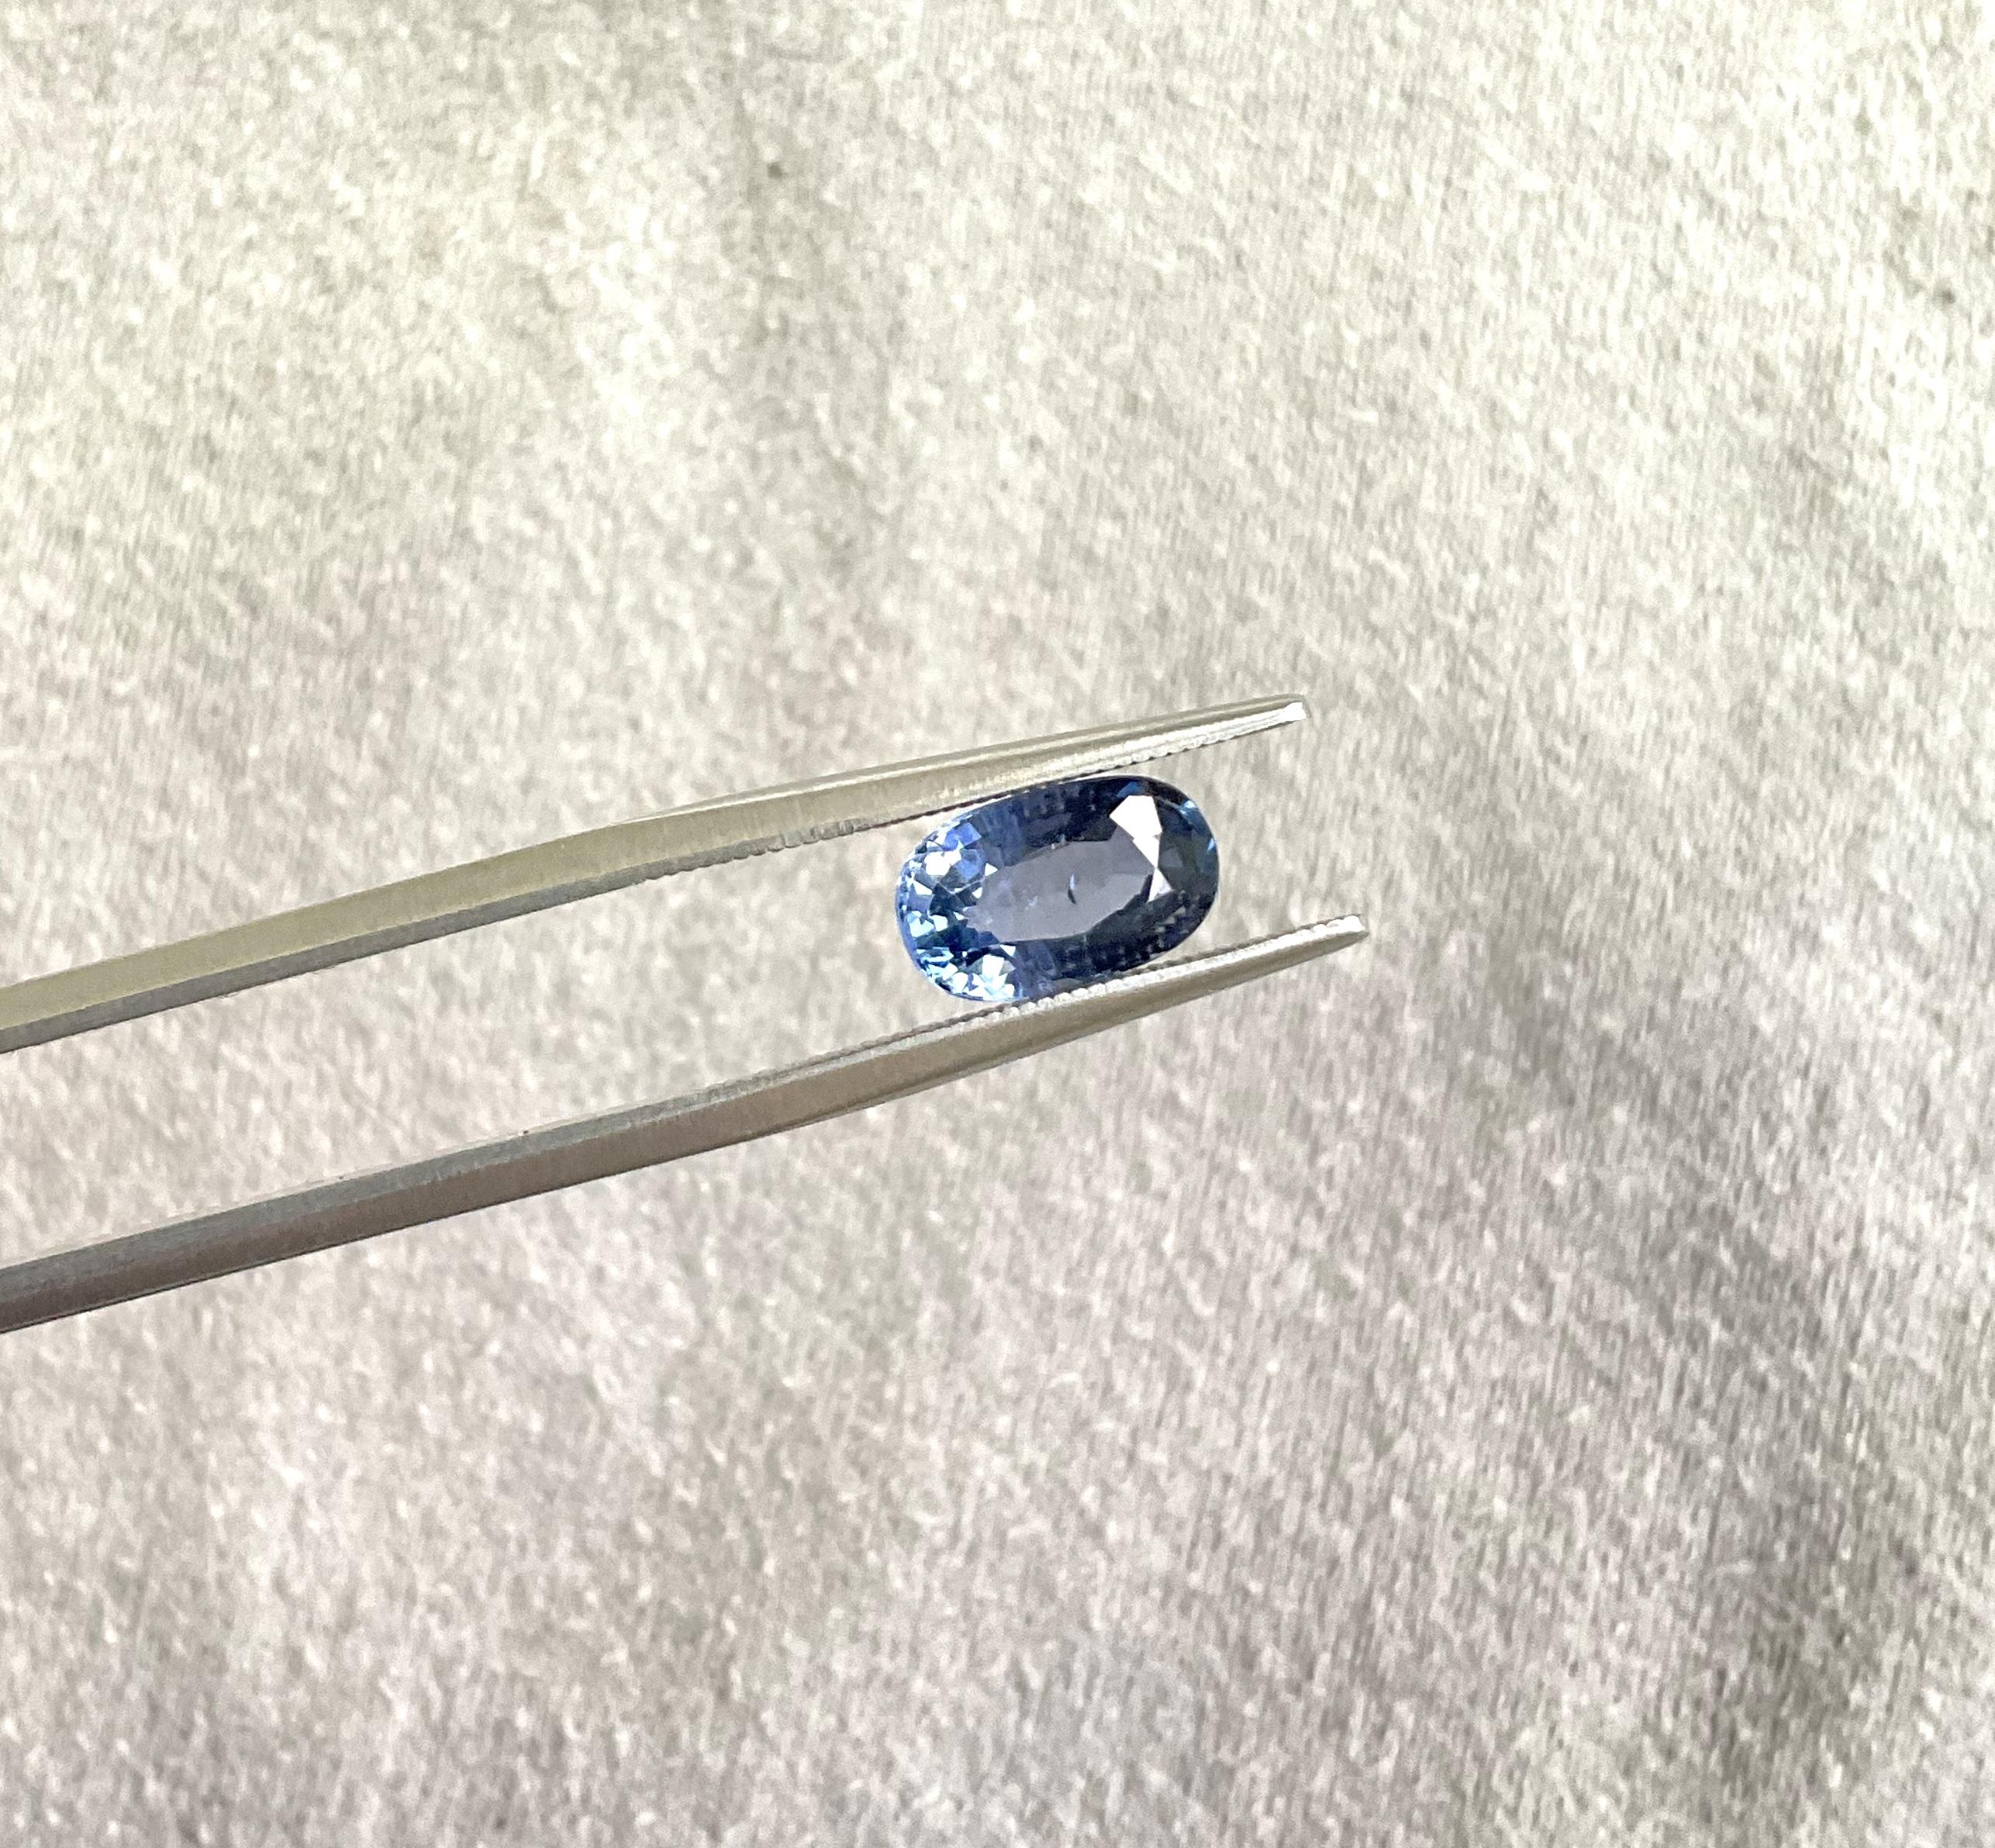 2.13 Carats Blue Spinel Oval Faceted Natural Gemstone for Fine Jewelry Tanzania  For Sale 3